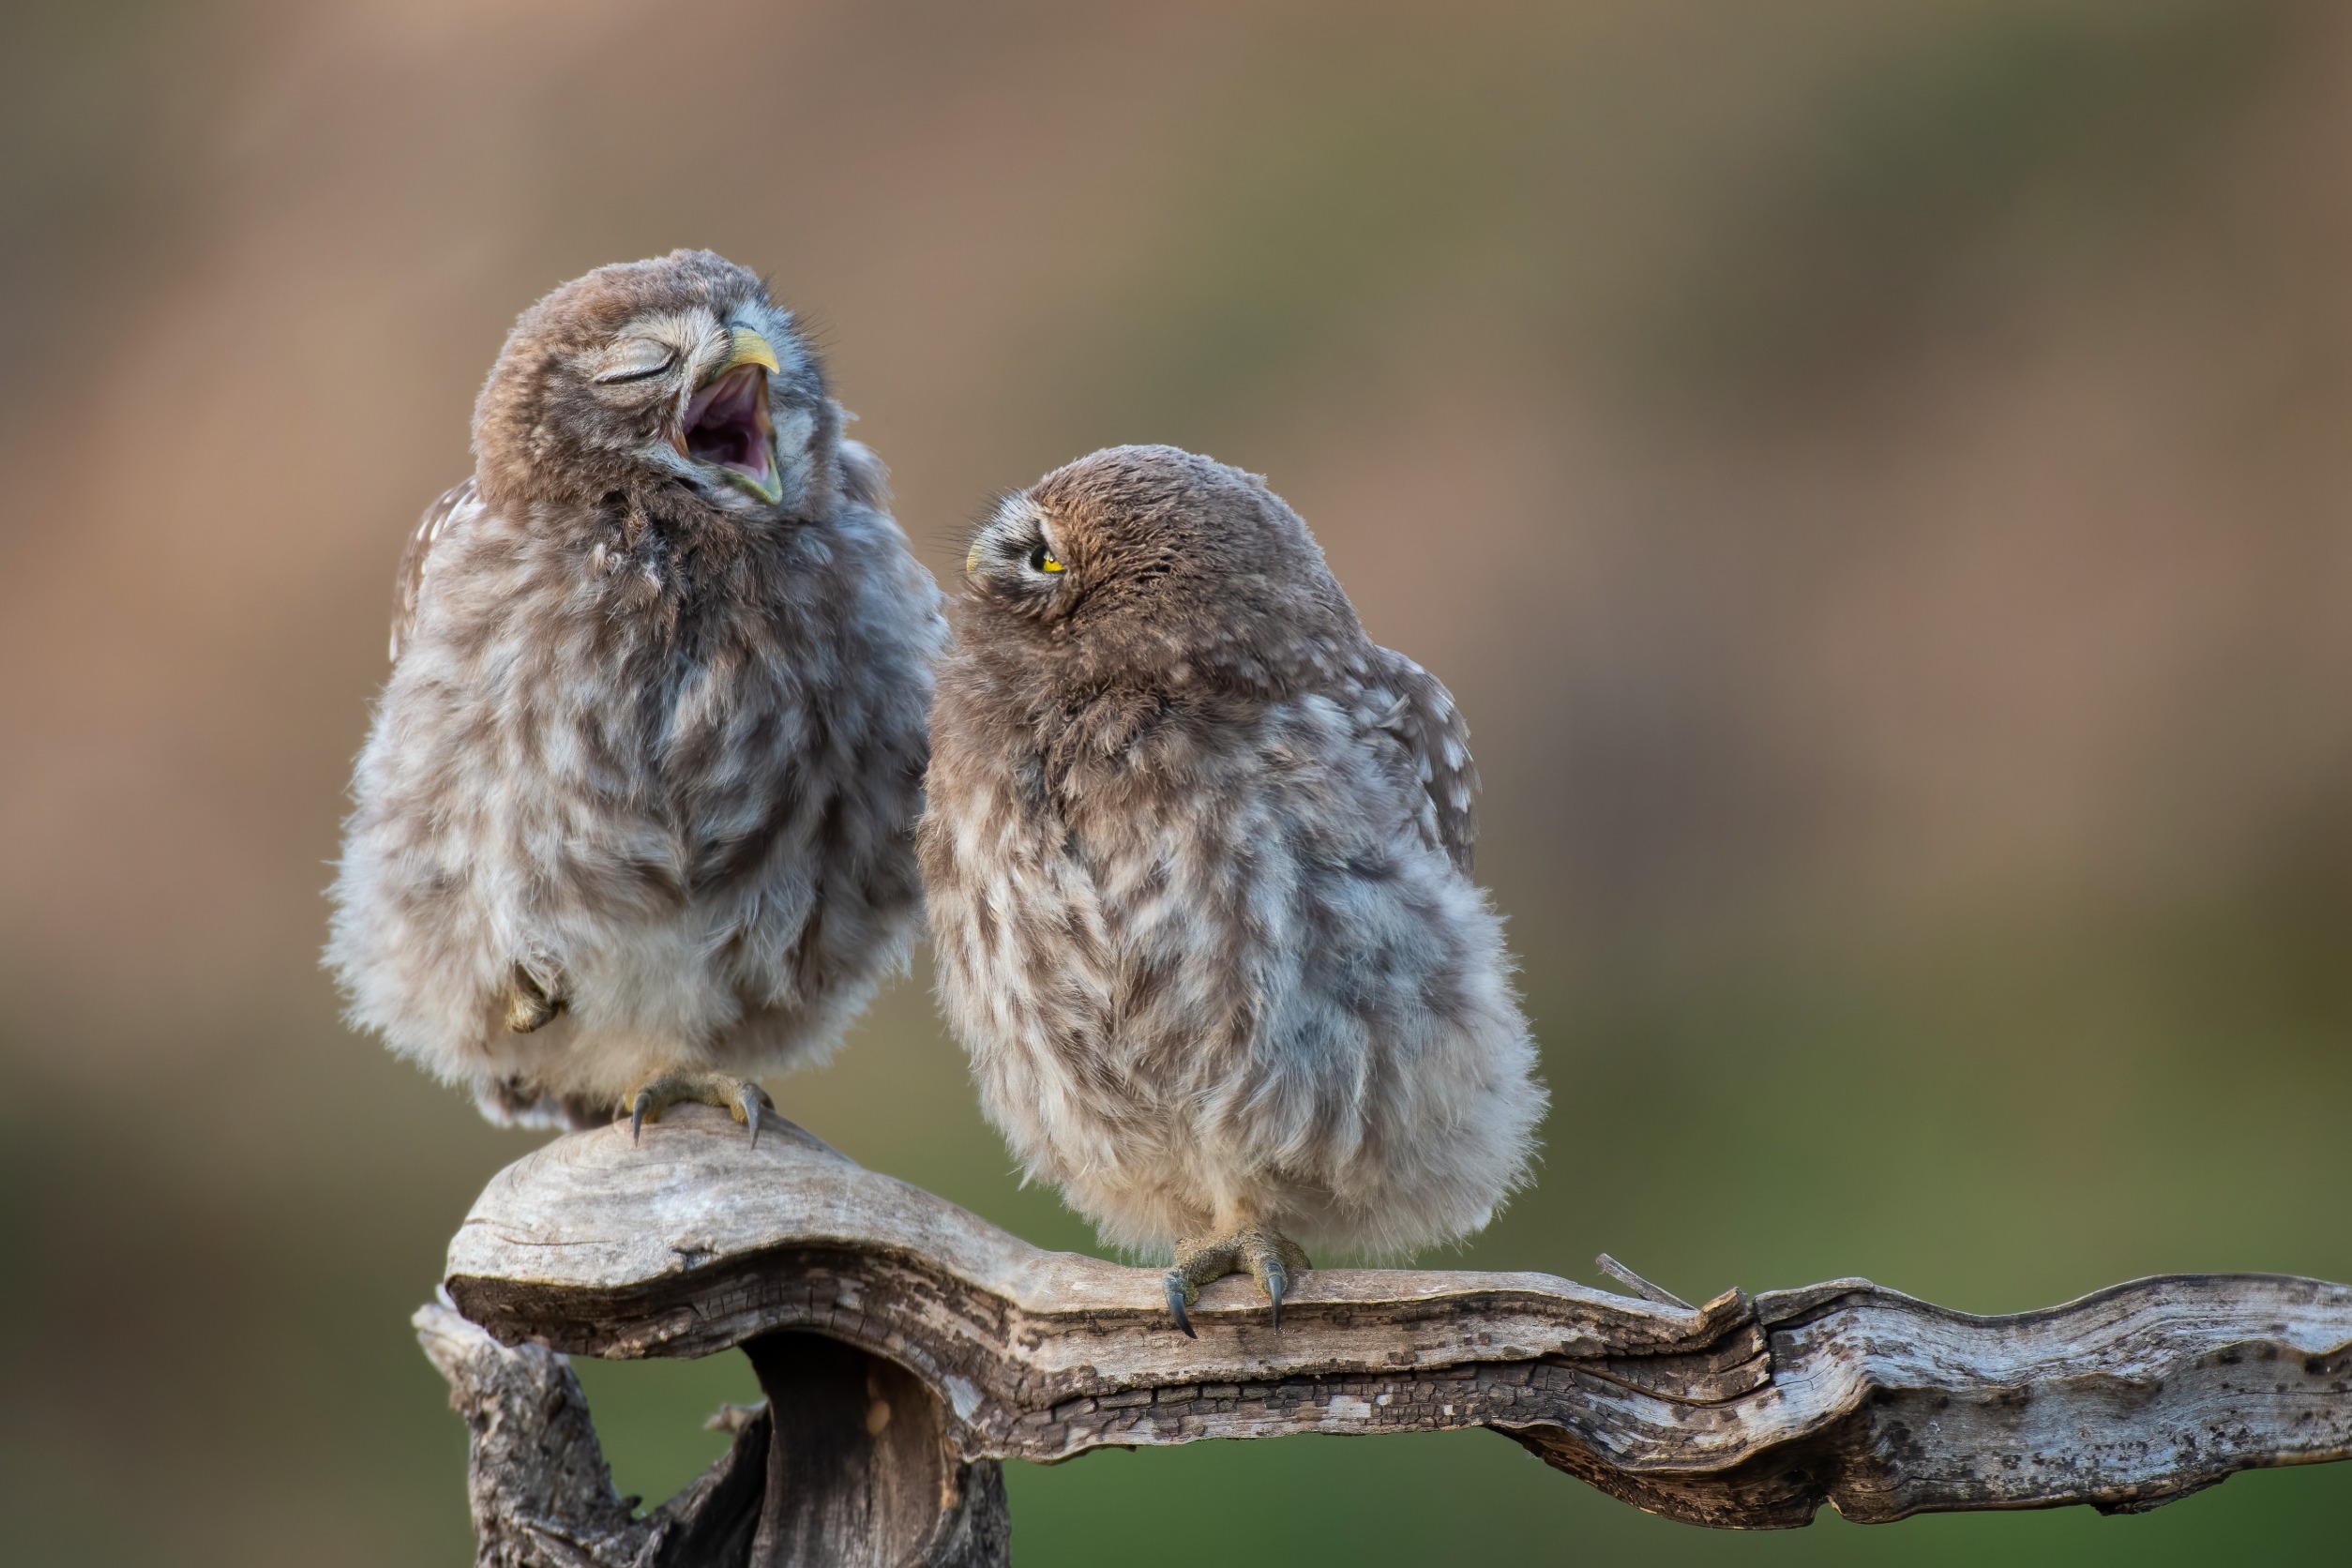 Two small brown owls sitting on a tree limb against a nature background, one with it's mouth open, symbolically asking, "Why do I have to work differently?”